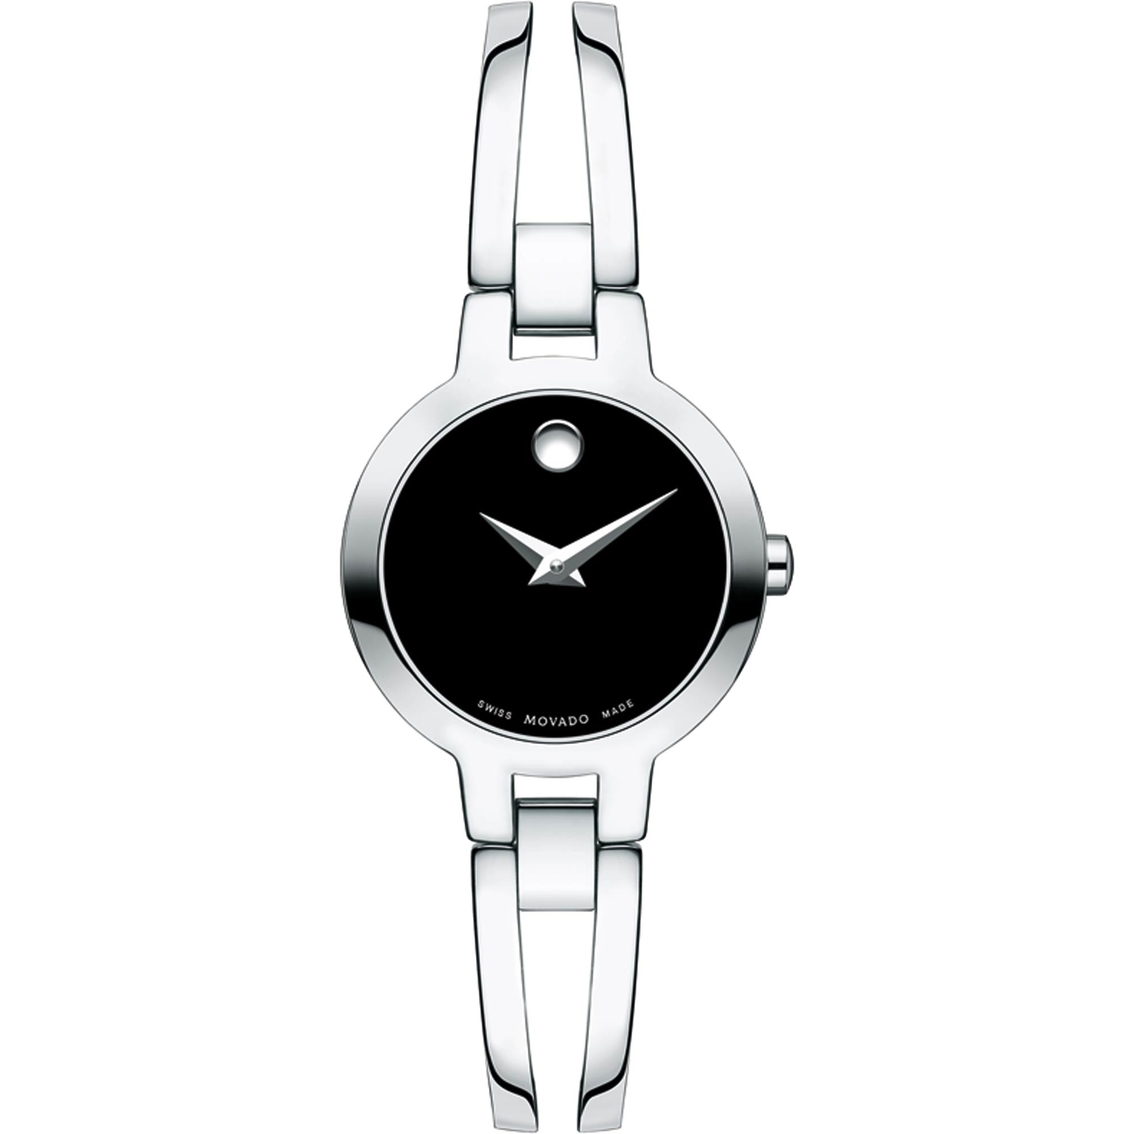 Movado Women's Amorosa Watch 24mm 0607153 | Stainless Steel Band ...